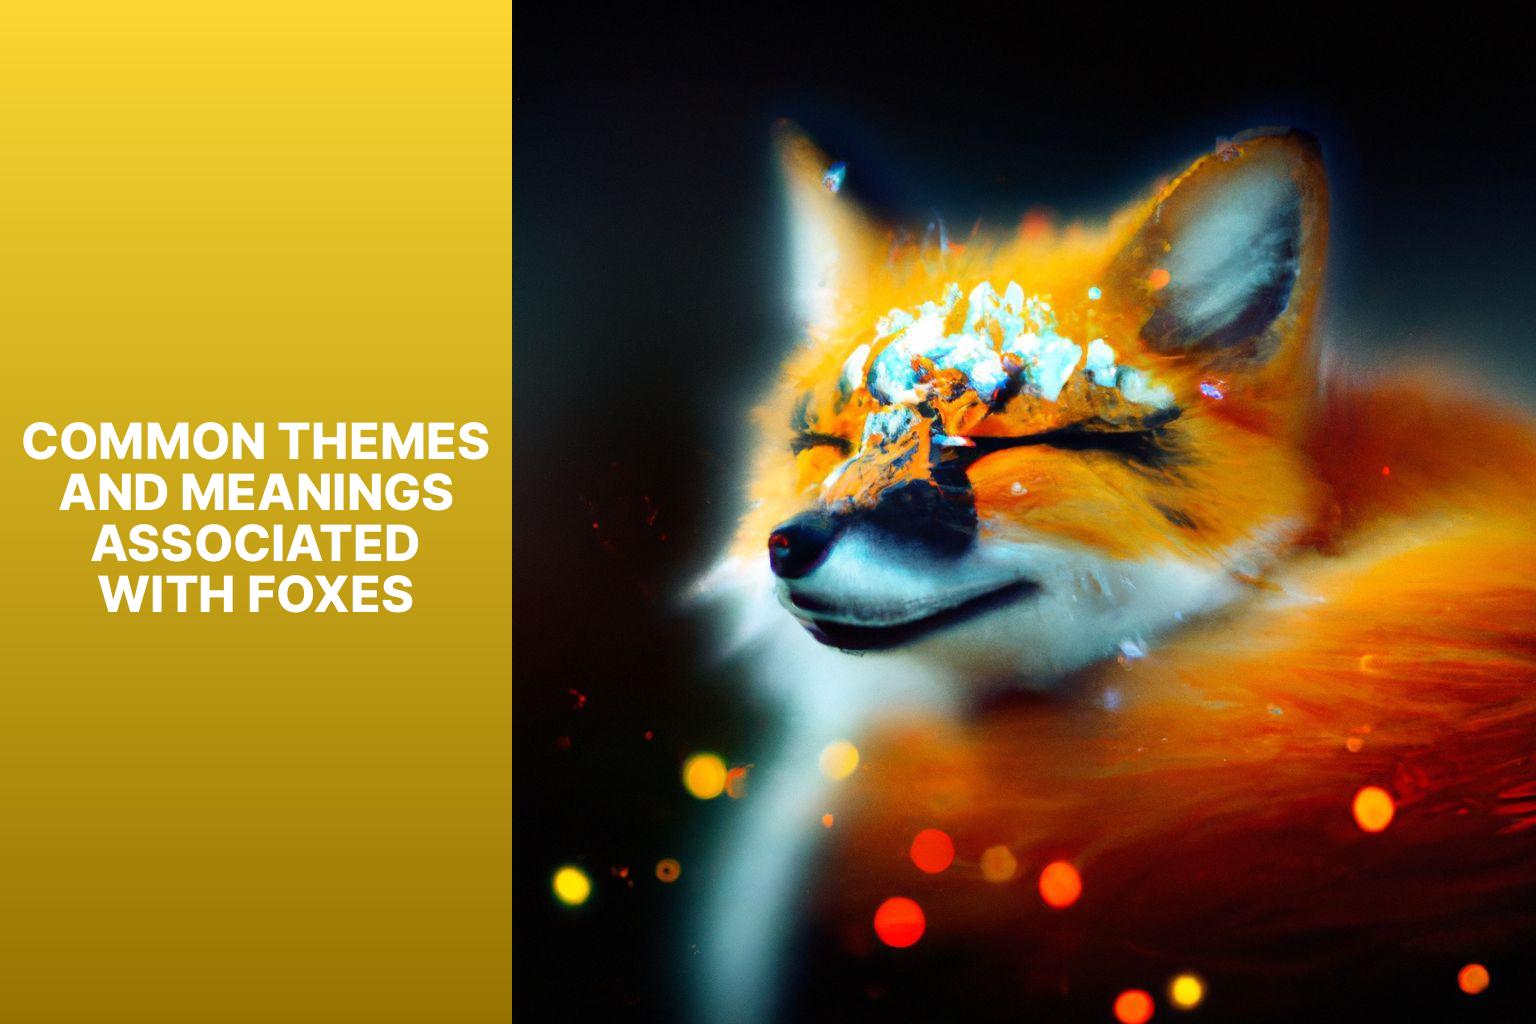 Common Themes and Meanings Associated with Foxes - Fox Myths and Meanings 